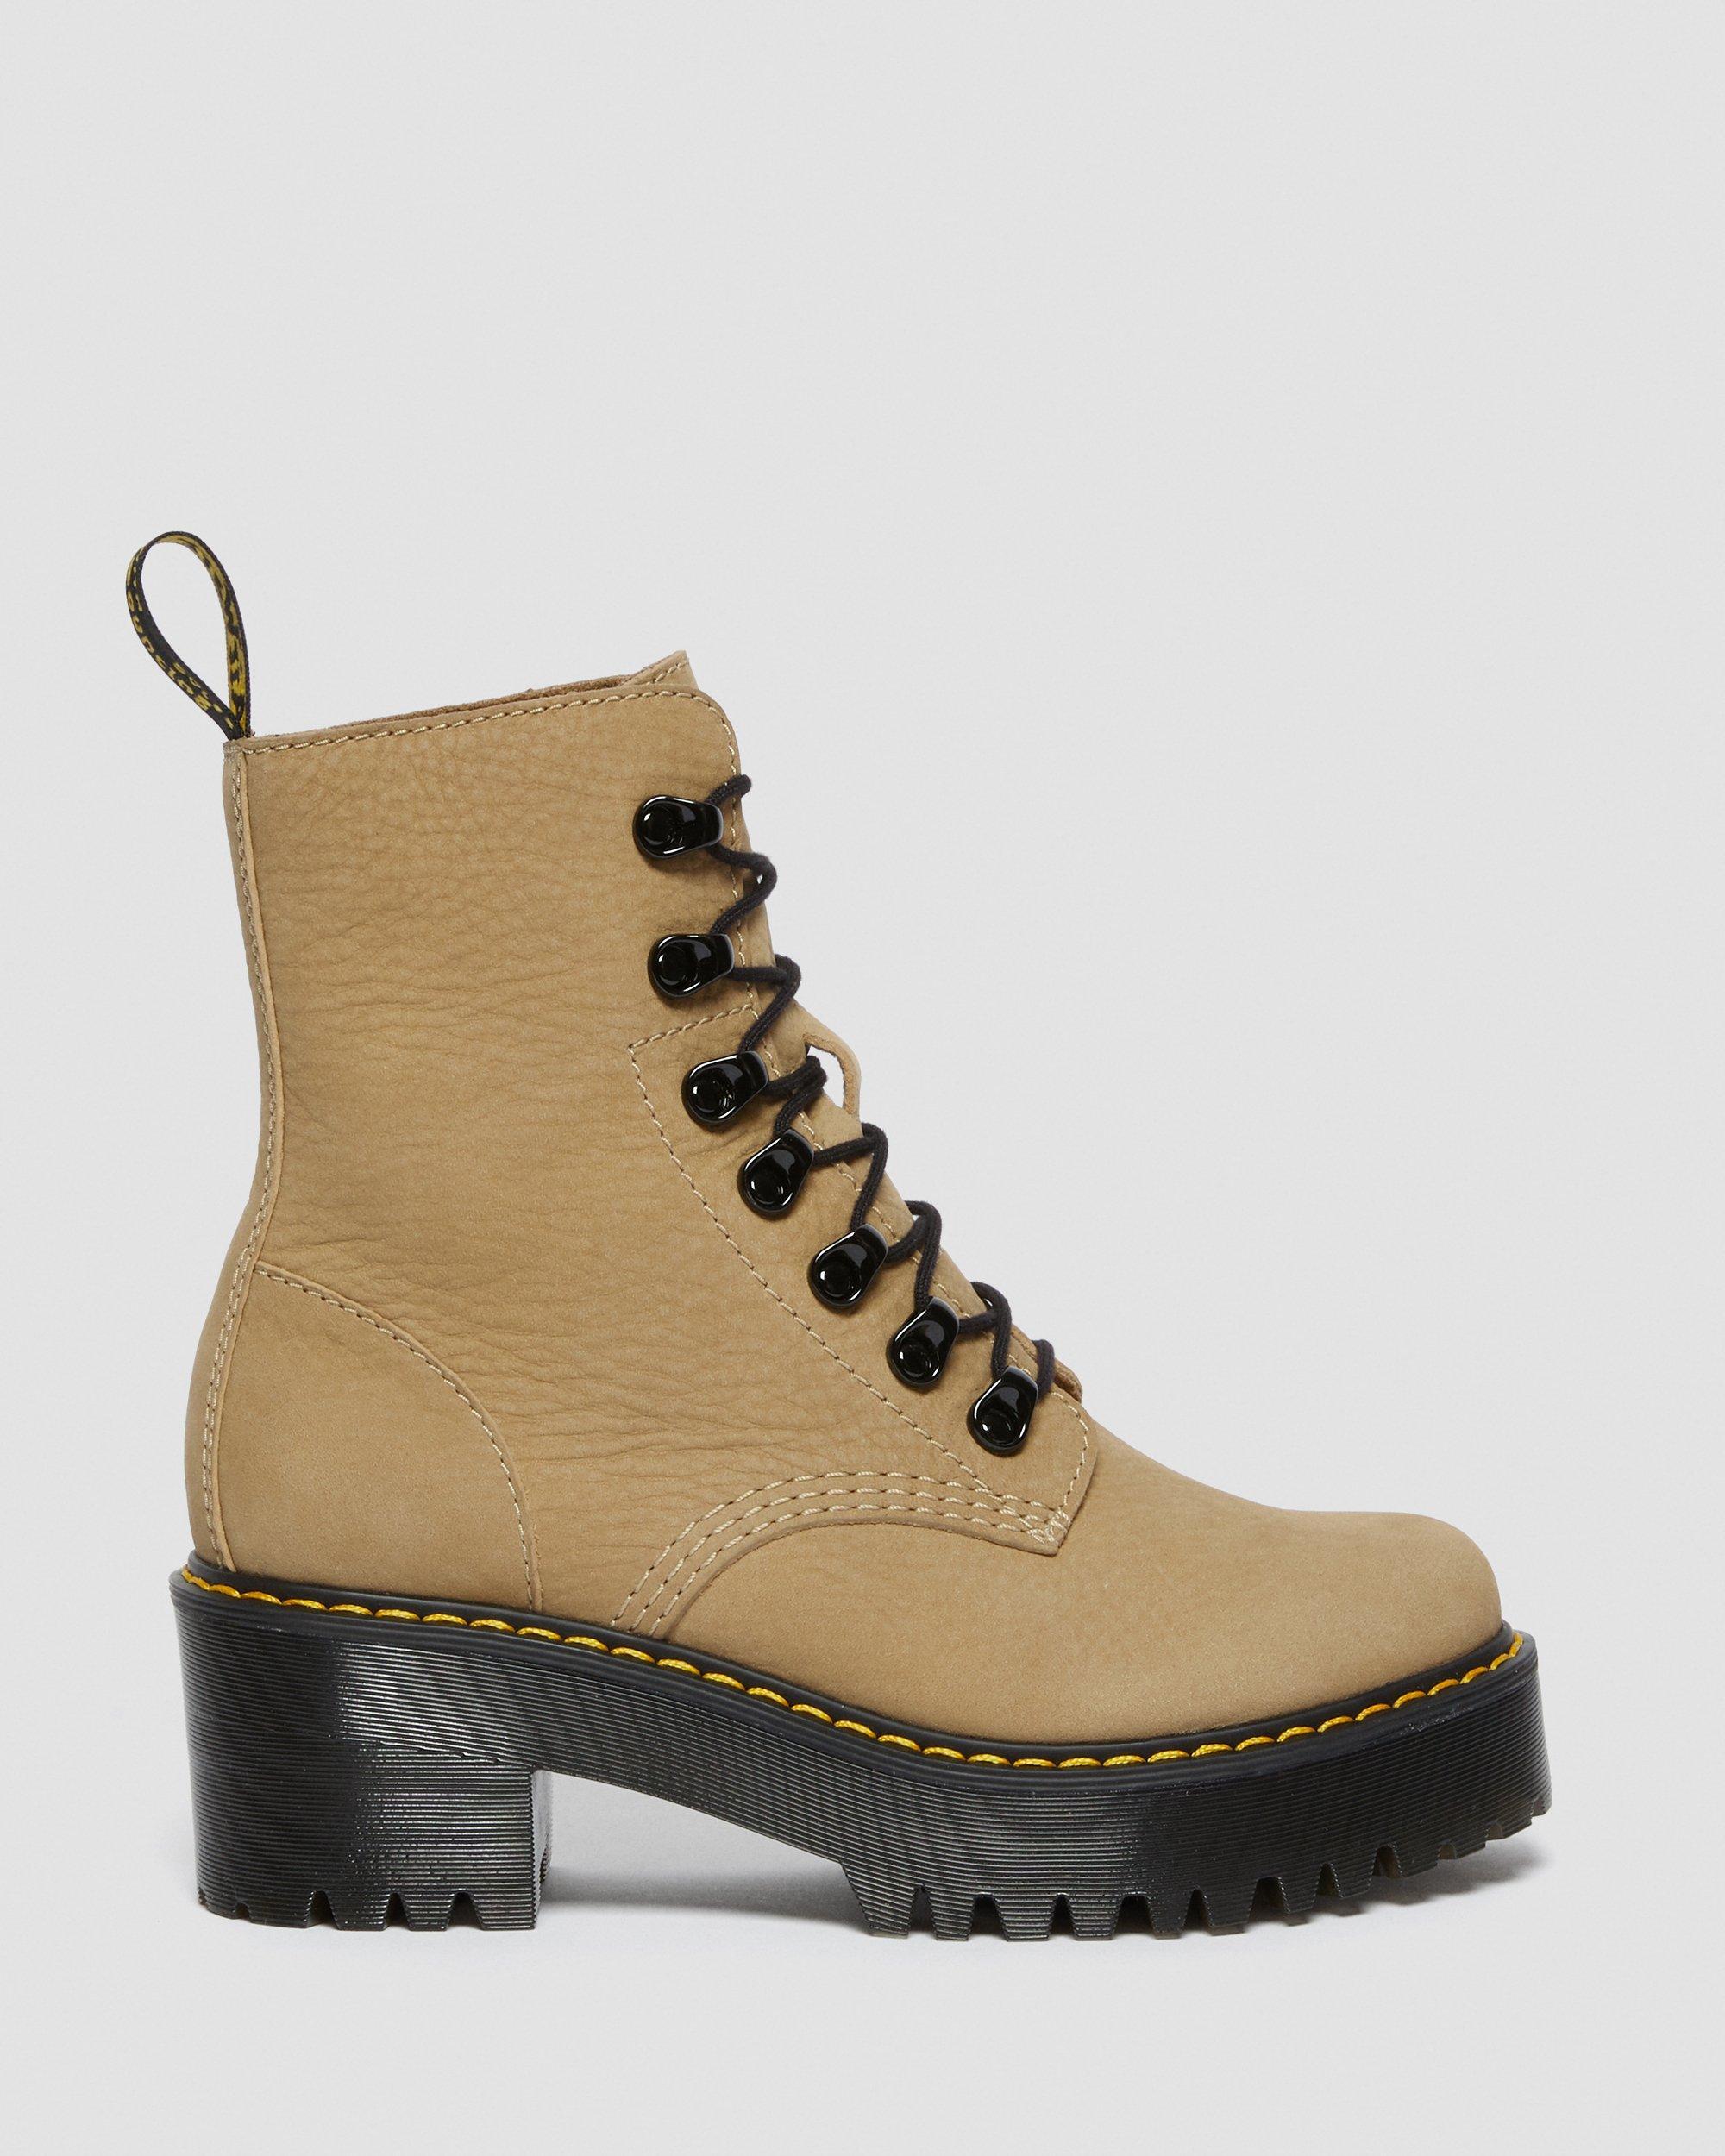 Dr. Martens Leona Nubuck Leather Lace Up Boots | Lyst